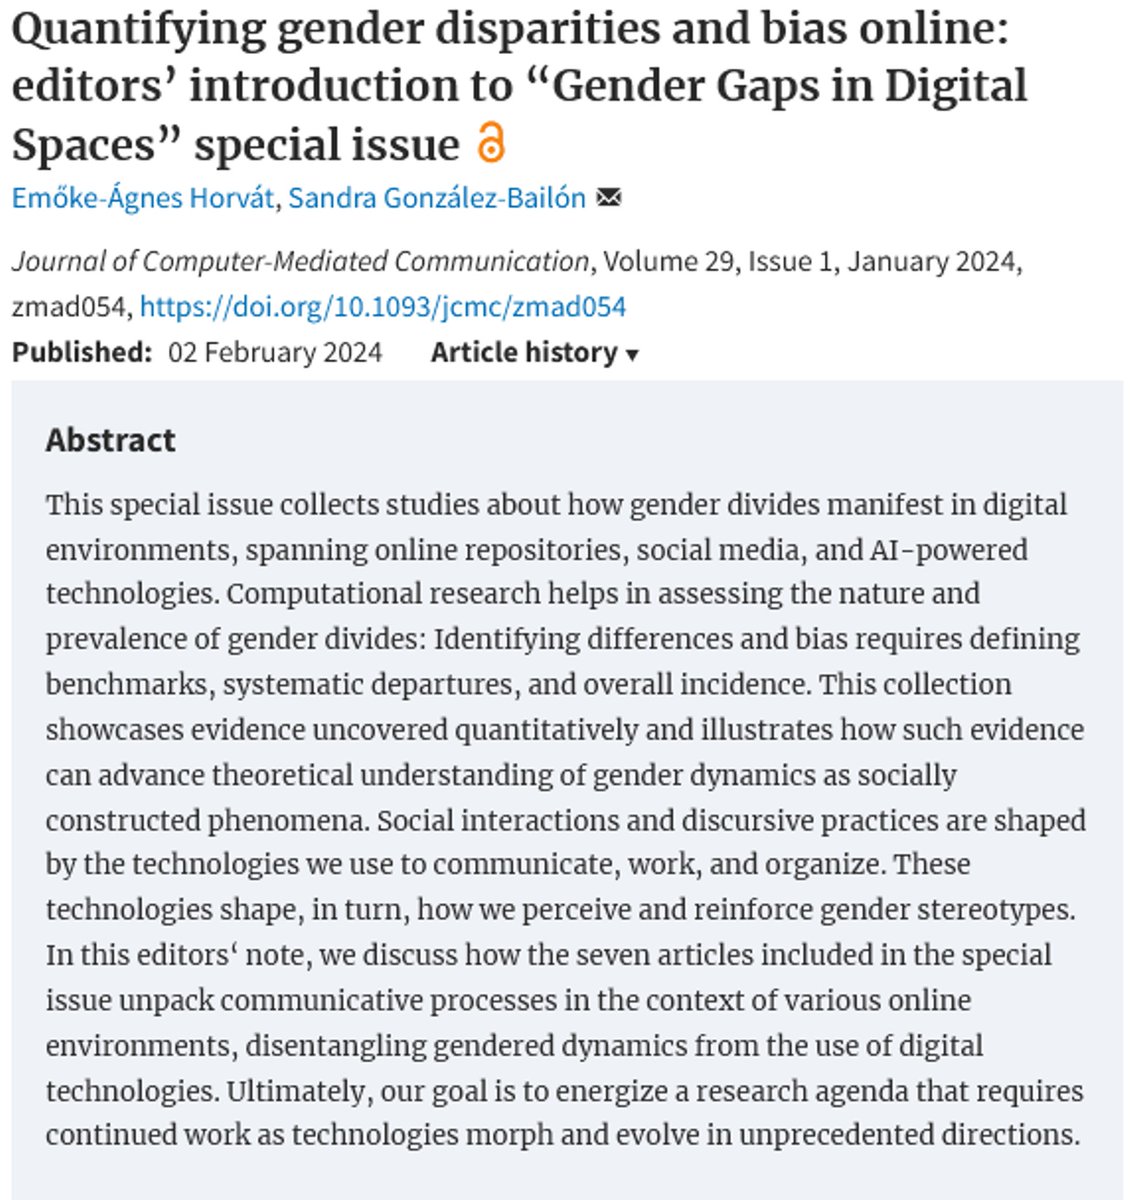 The Special Issue “Gender Gaps in Digital Spaces” is out @ica_jcmc! This project started in ICA-Paris'22. Thx to Agnes @LINKatNU for co-editing w me & to @nicole_ellison & @cuihua for their vision. The issue includes seven fantastic articles, more here: academic.oup.com/jcmc/article/2…